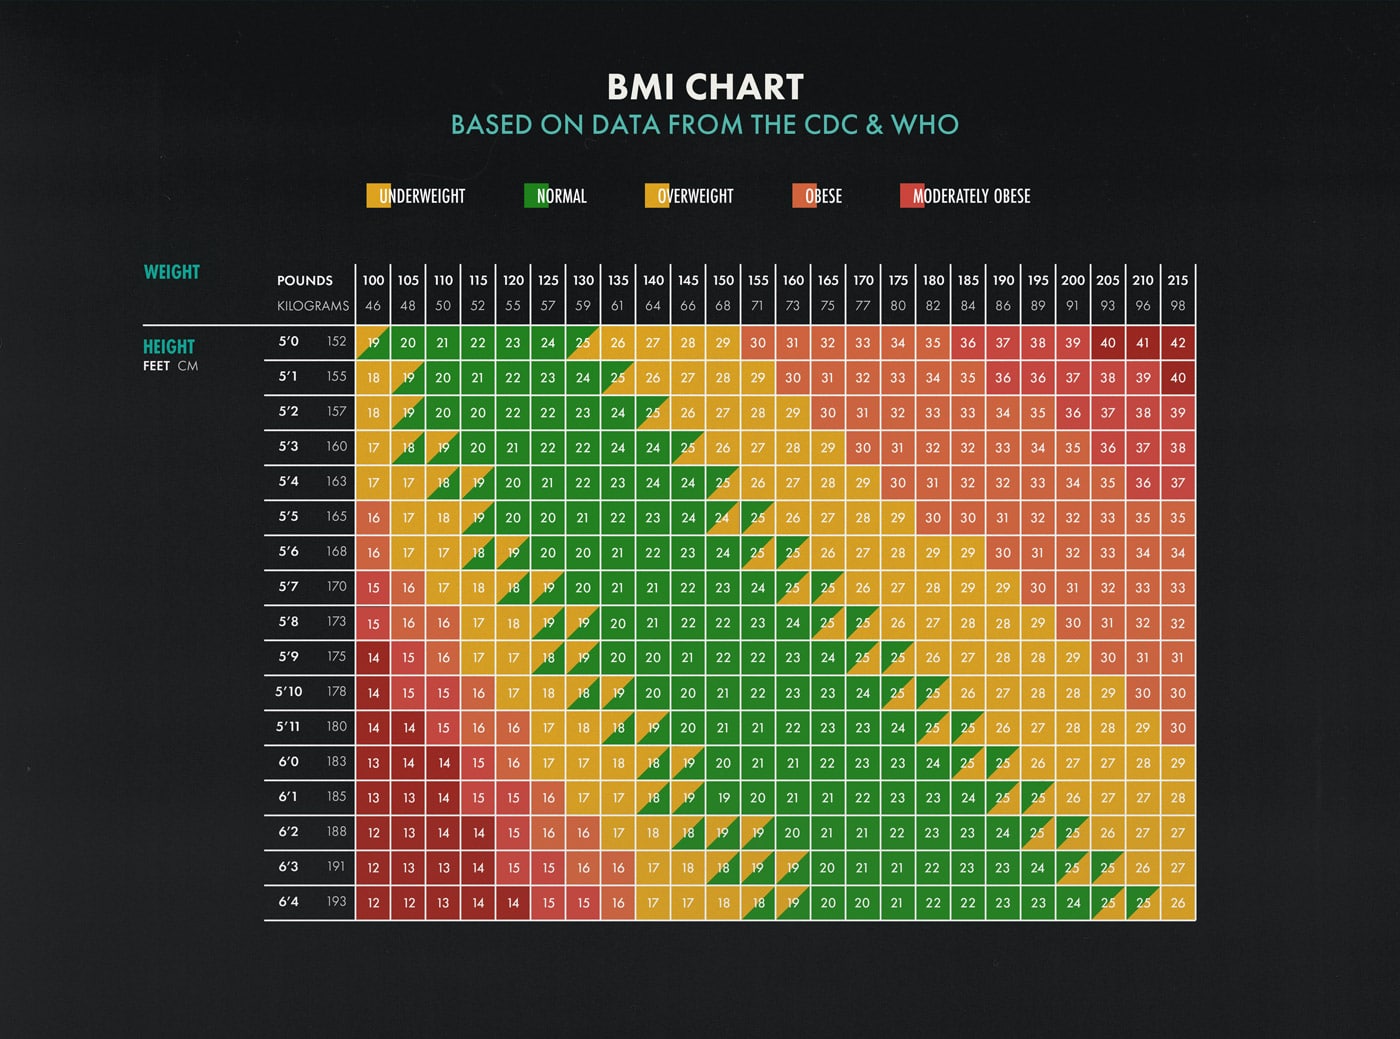 BMI Chart Healthy Weight from CDC & WHO